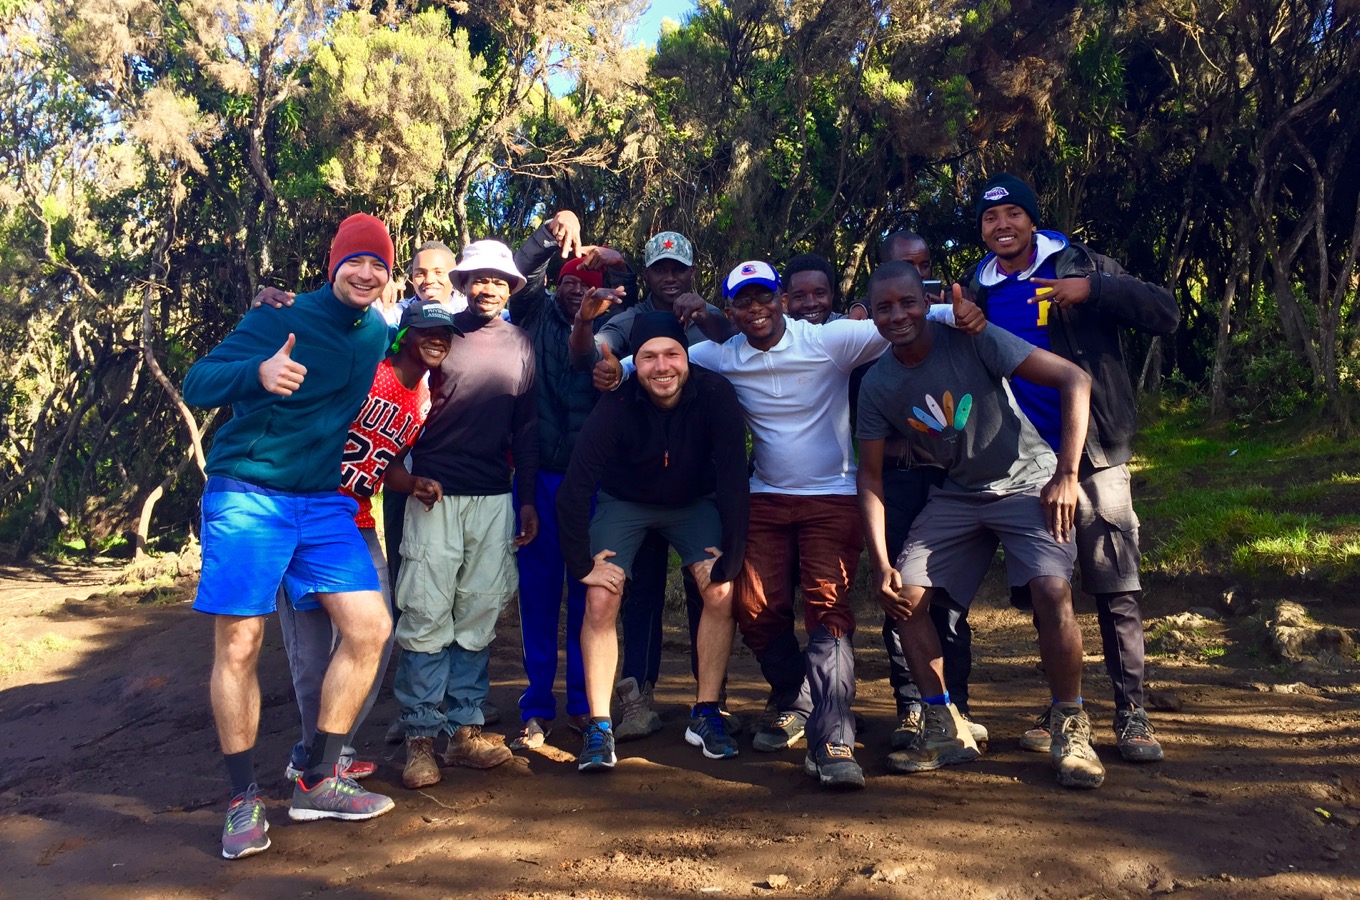 Group photo with our team on Kilimanjaro